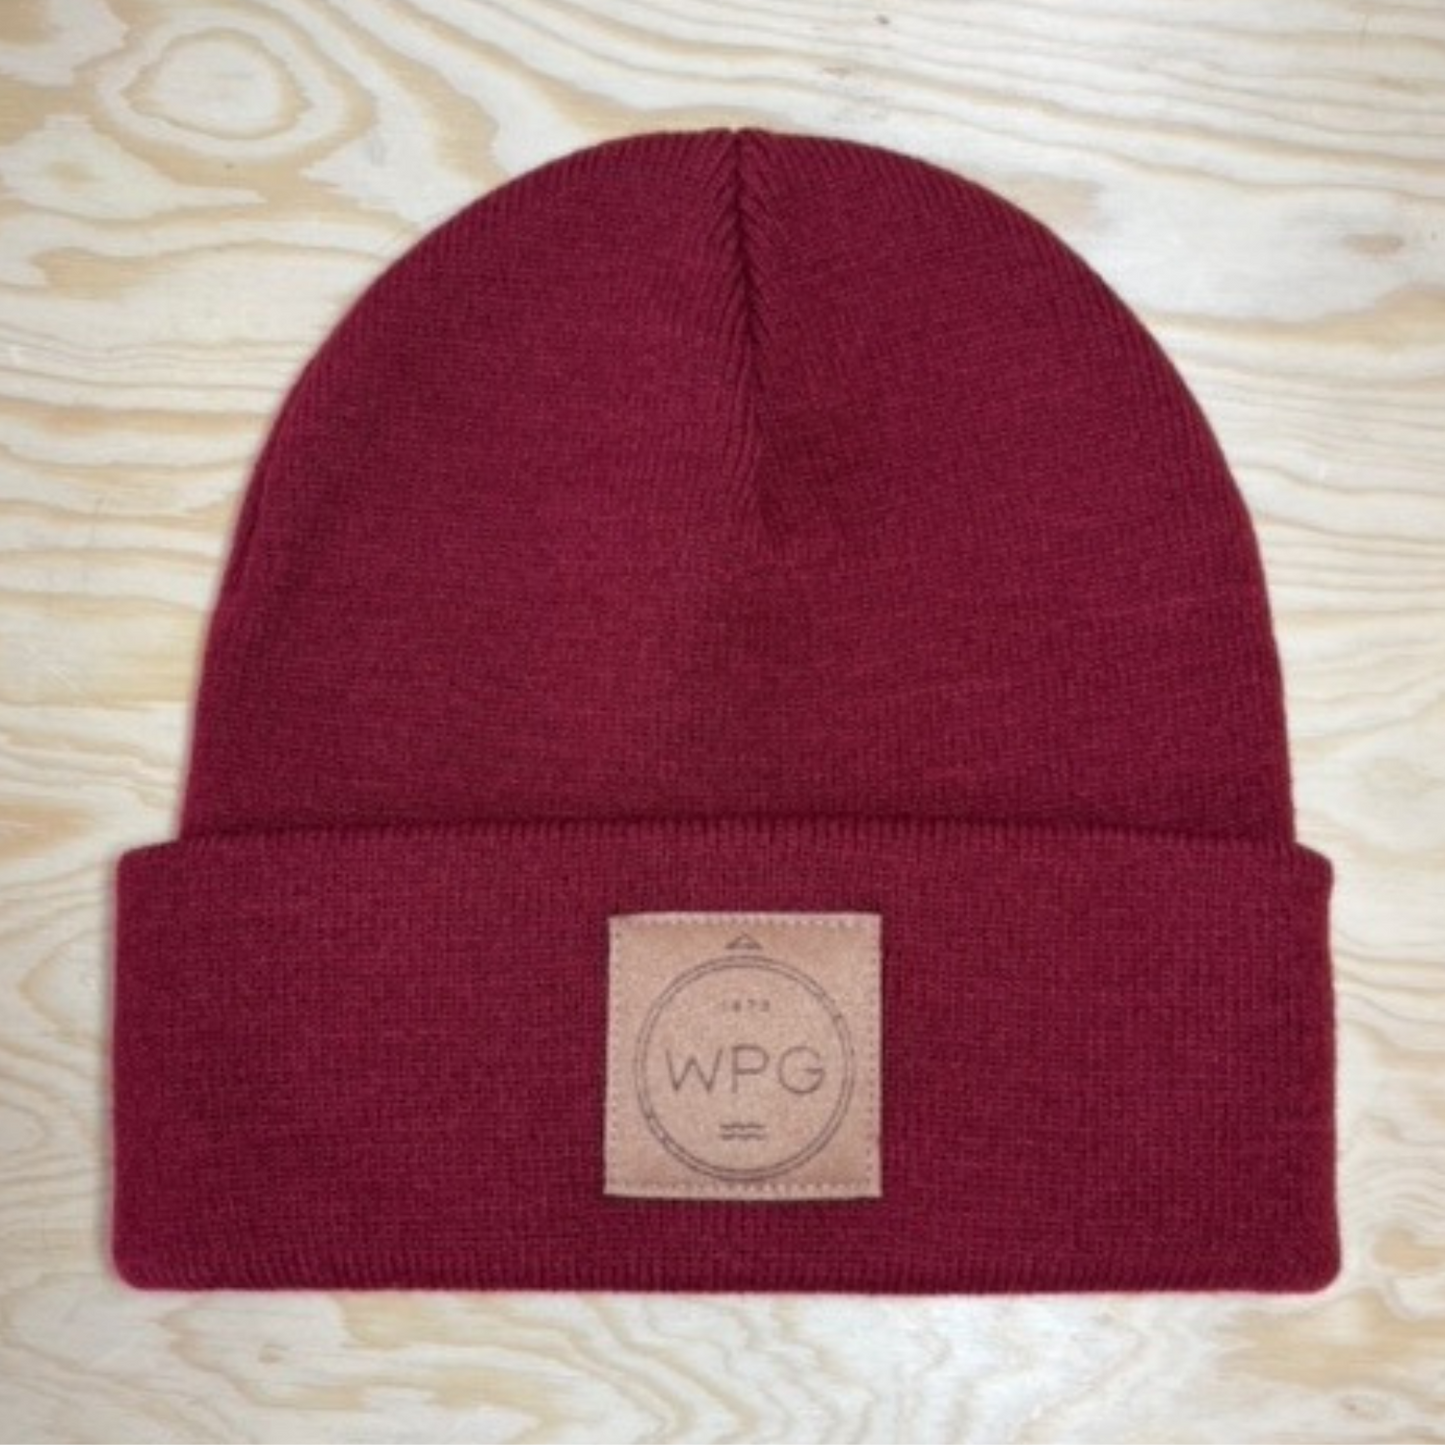 WPG Compass Toque | Natural on Maroon